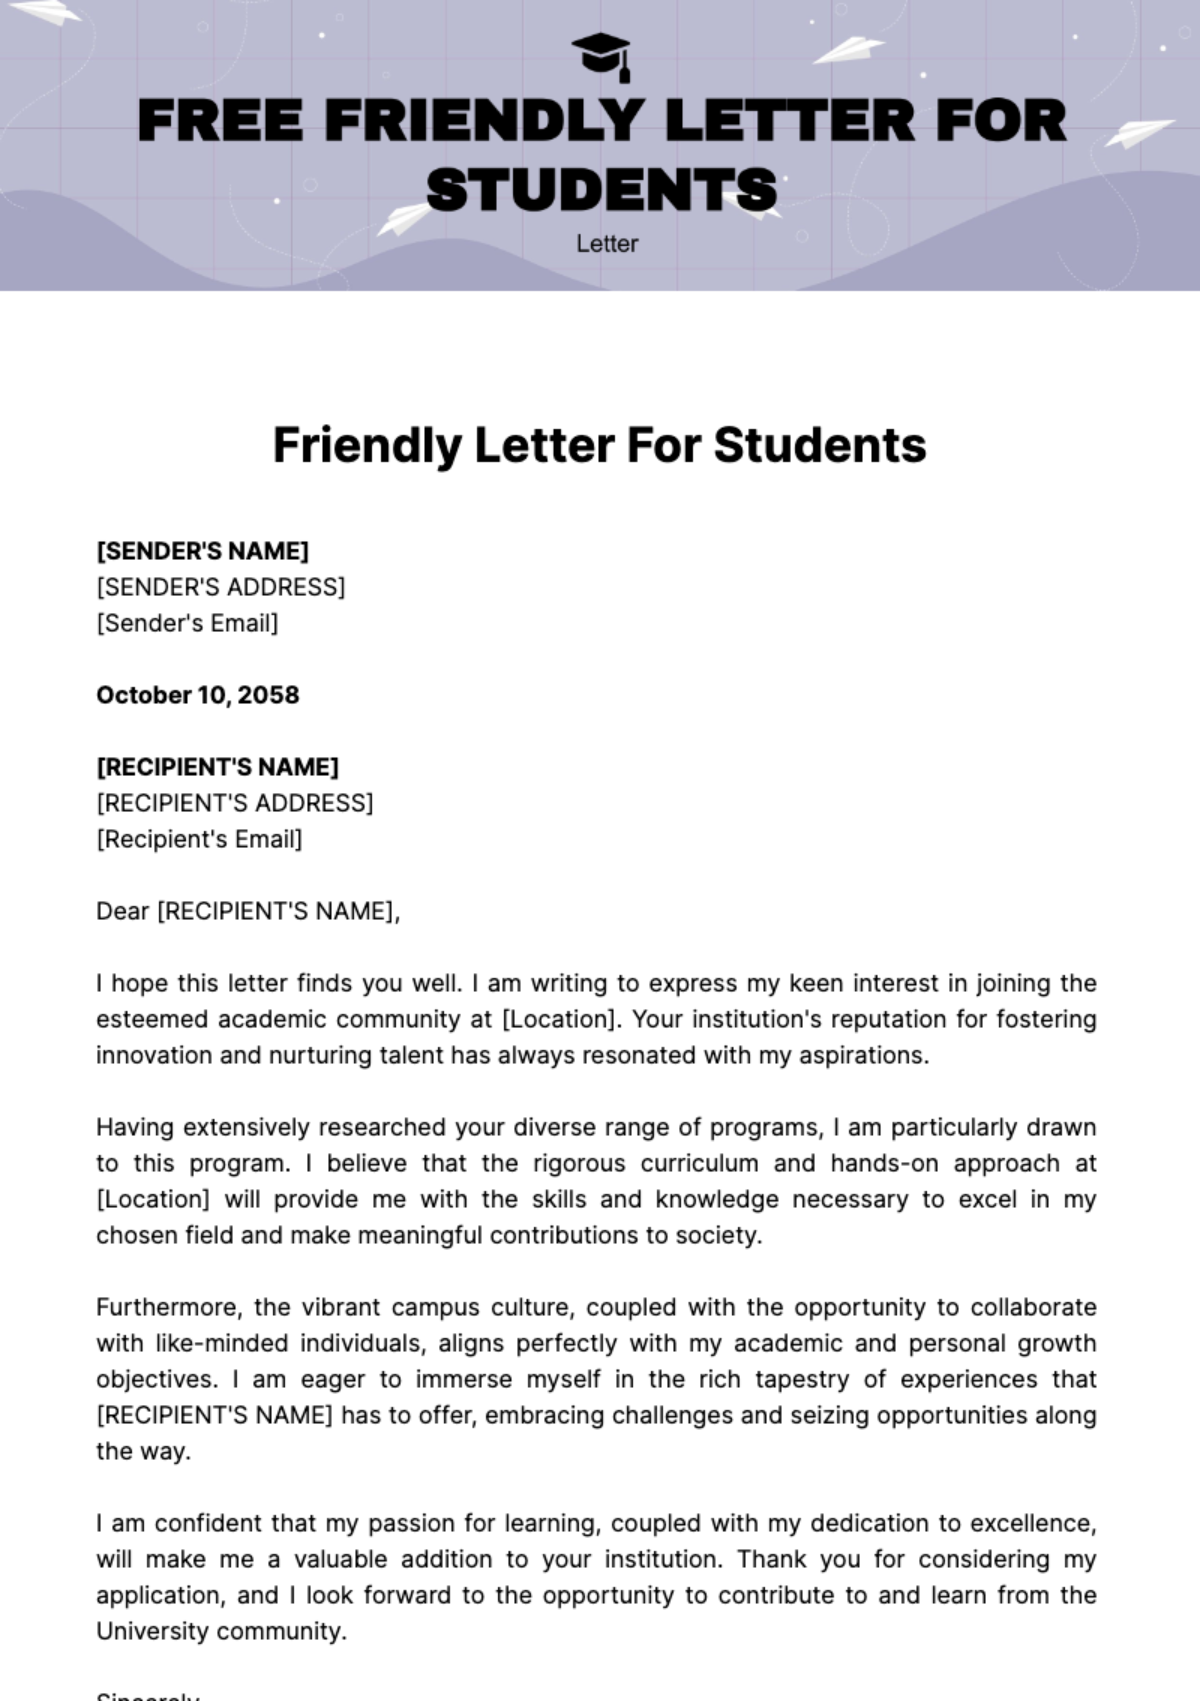 Free Friendly Letter for Students Template